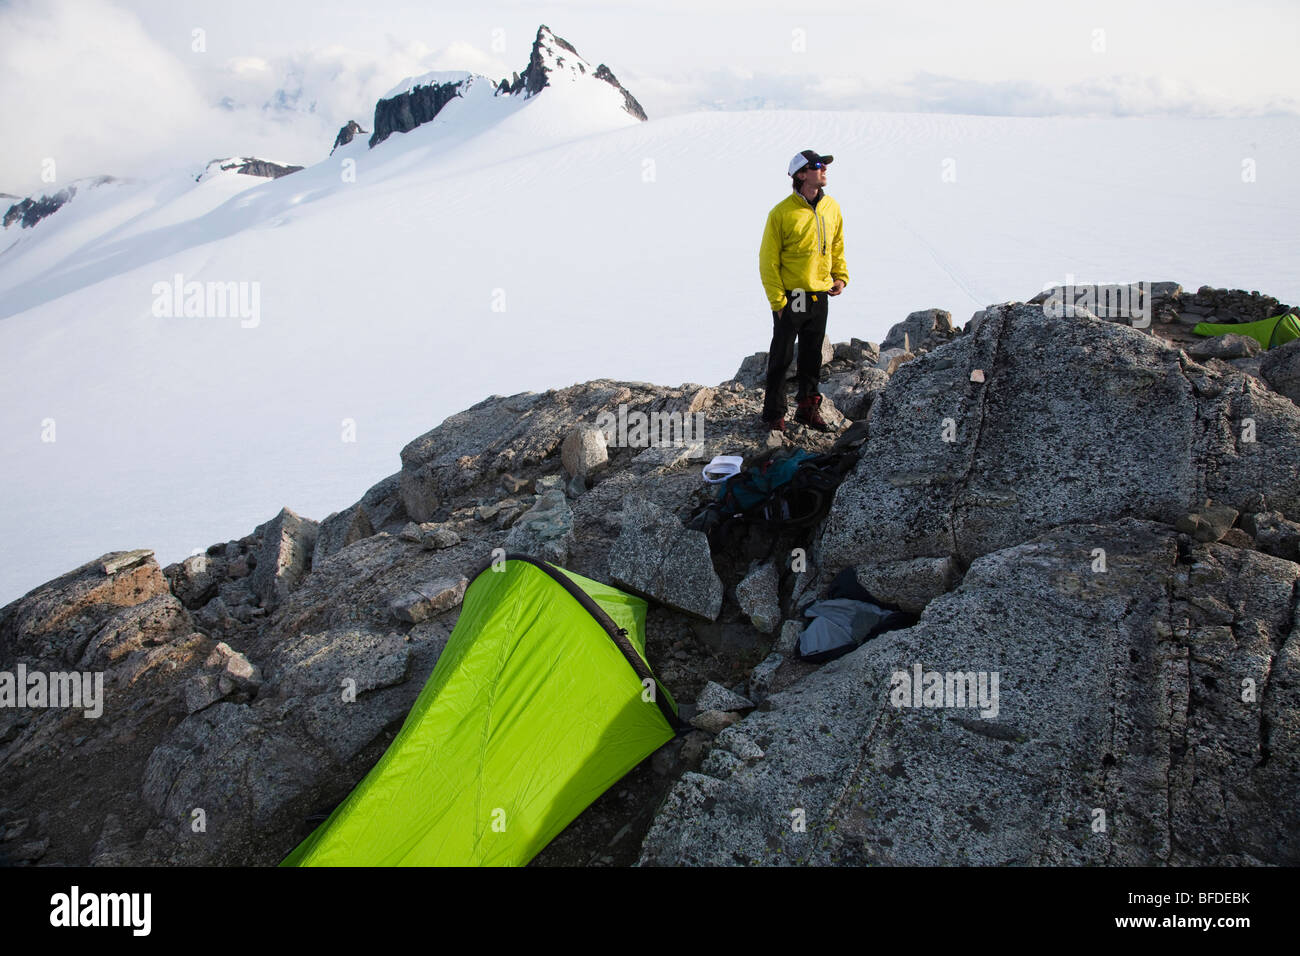 A young climber stands on a rock outcrop near his tent while climbing on a glacier in the mountains. Stock Photo